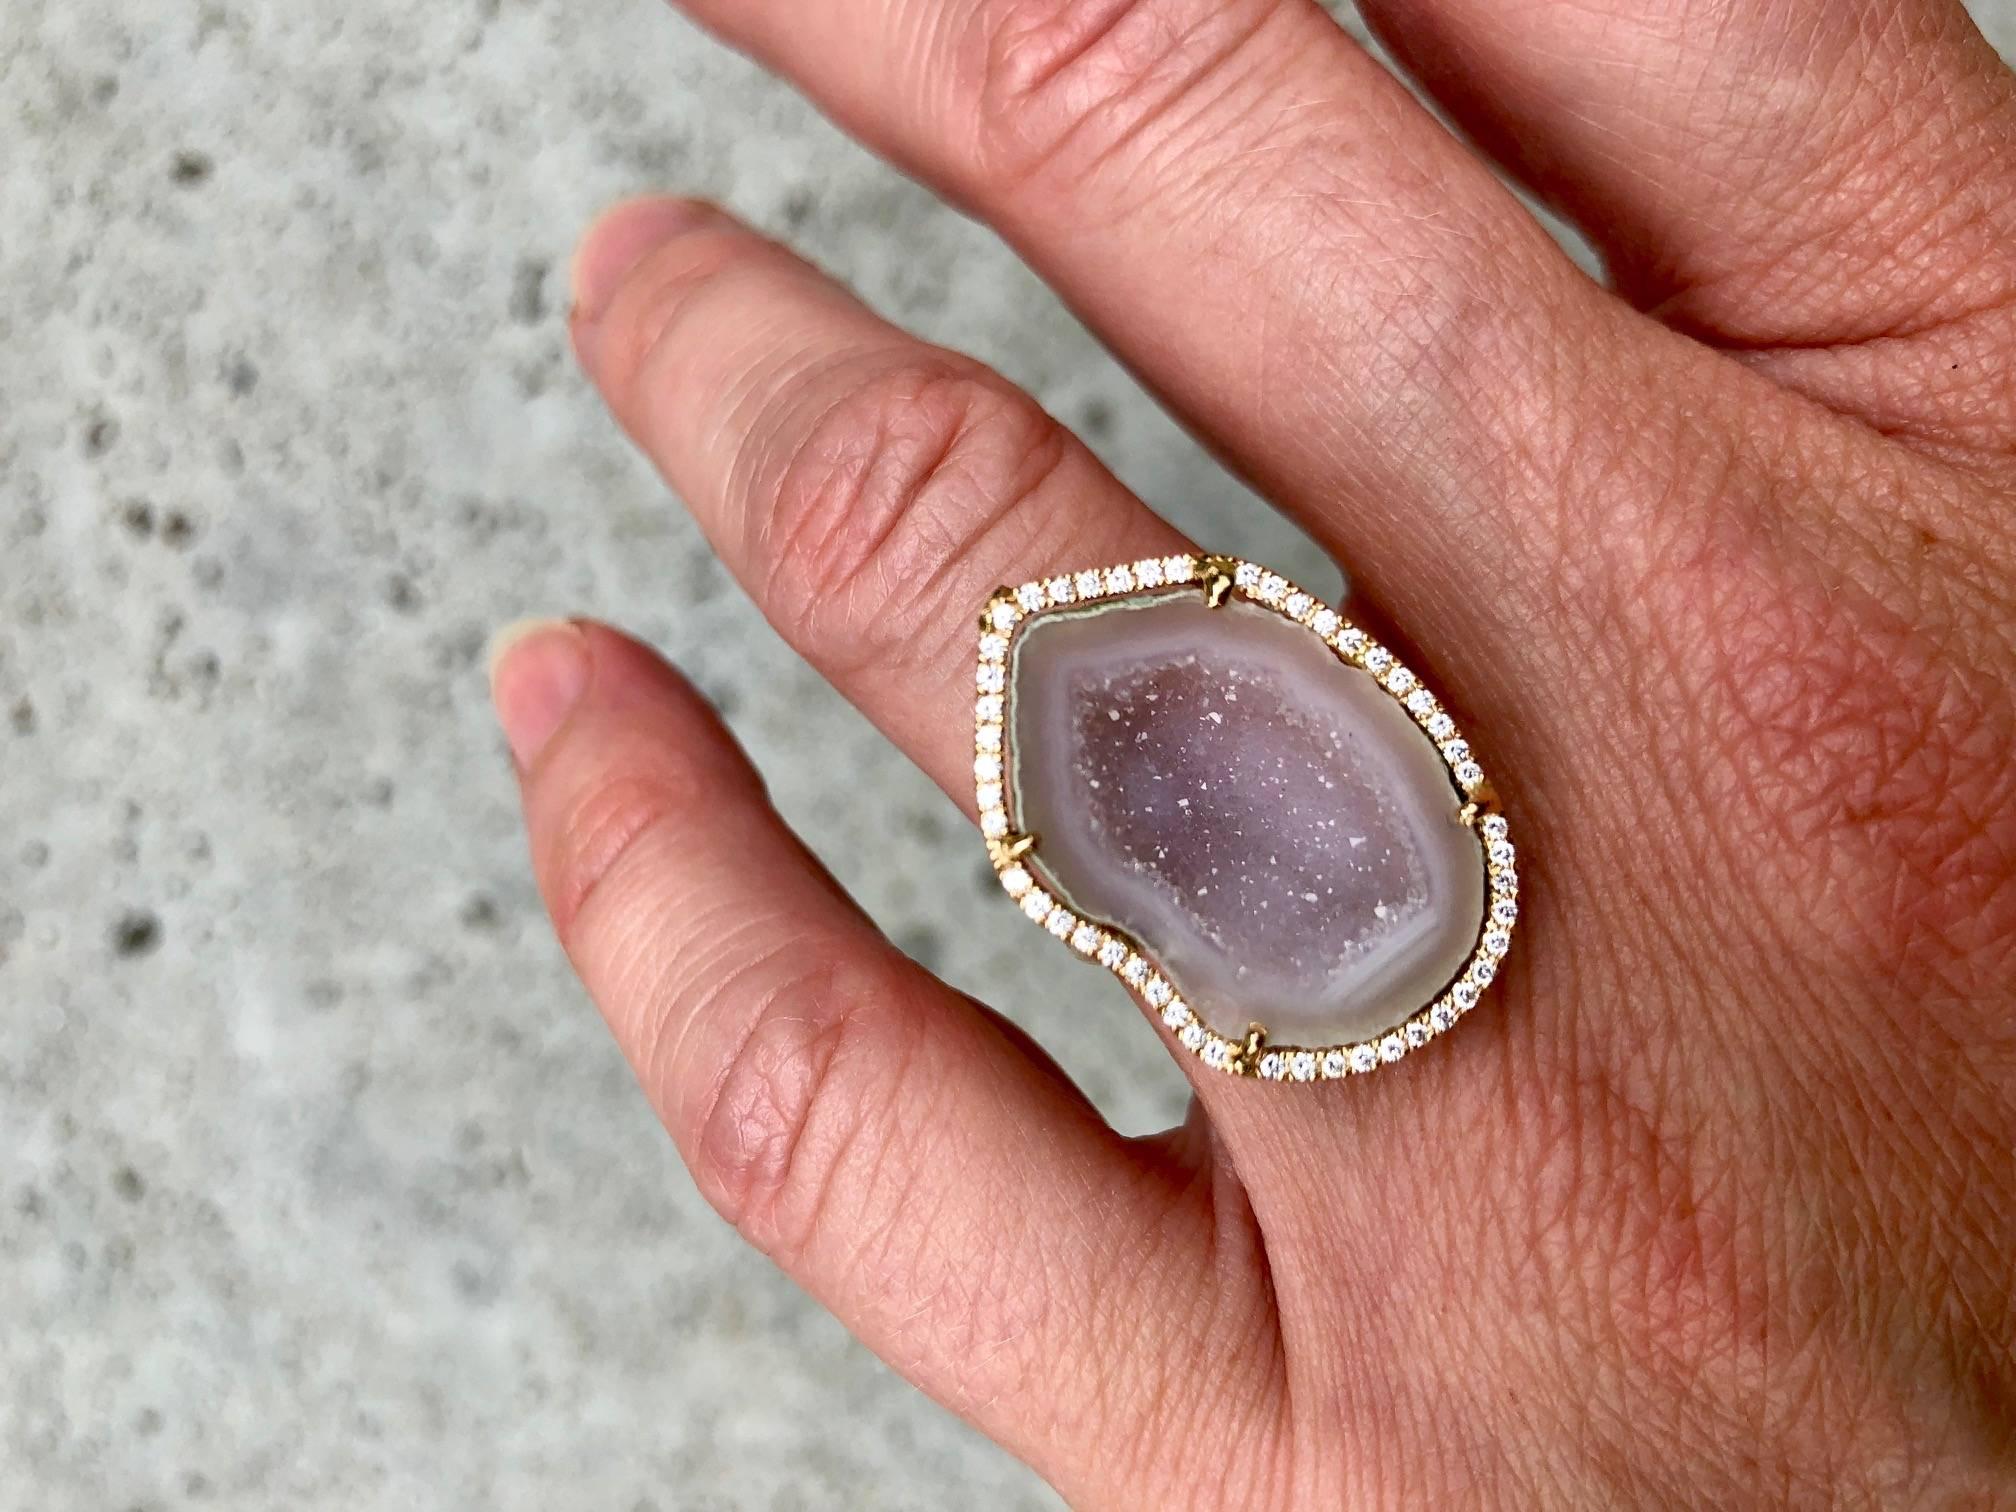 Pink is the new black!
This cute pink ring is the perfect ring to give the one you love.
Set with 18 k rose gold and 0,30 ct shimmering diamonds.
Great for summer and winter styles.